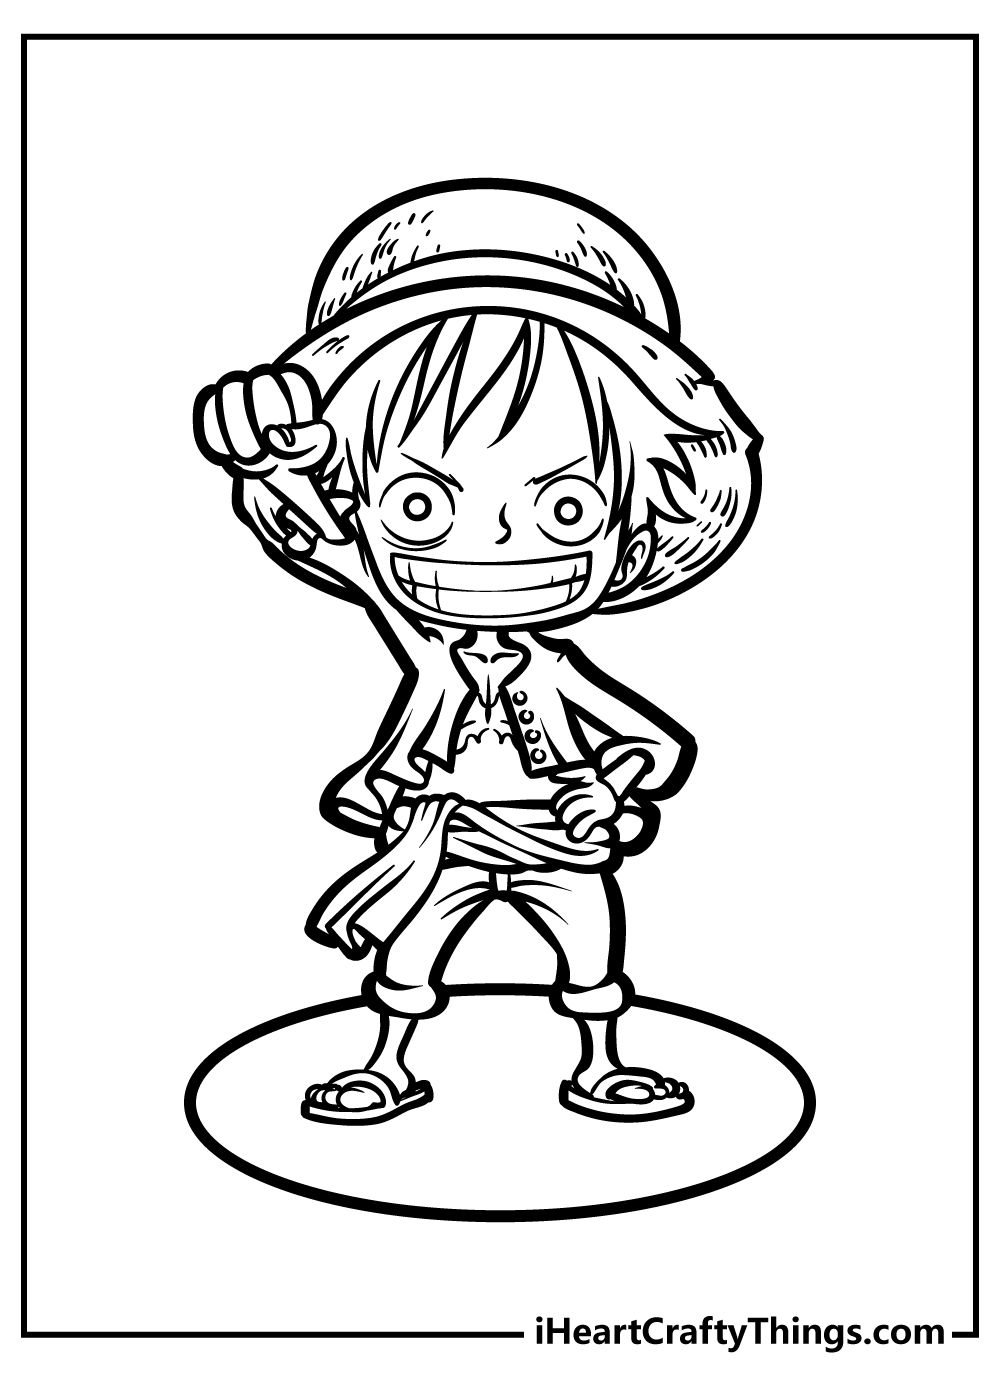 Anime Boy Coloring Pages  Free Printable Coloring Pages for Kids